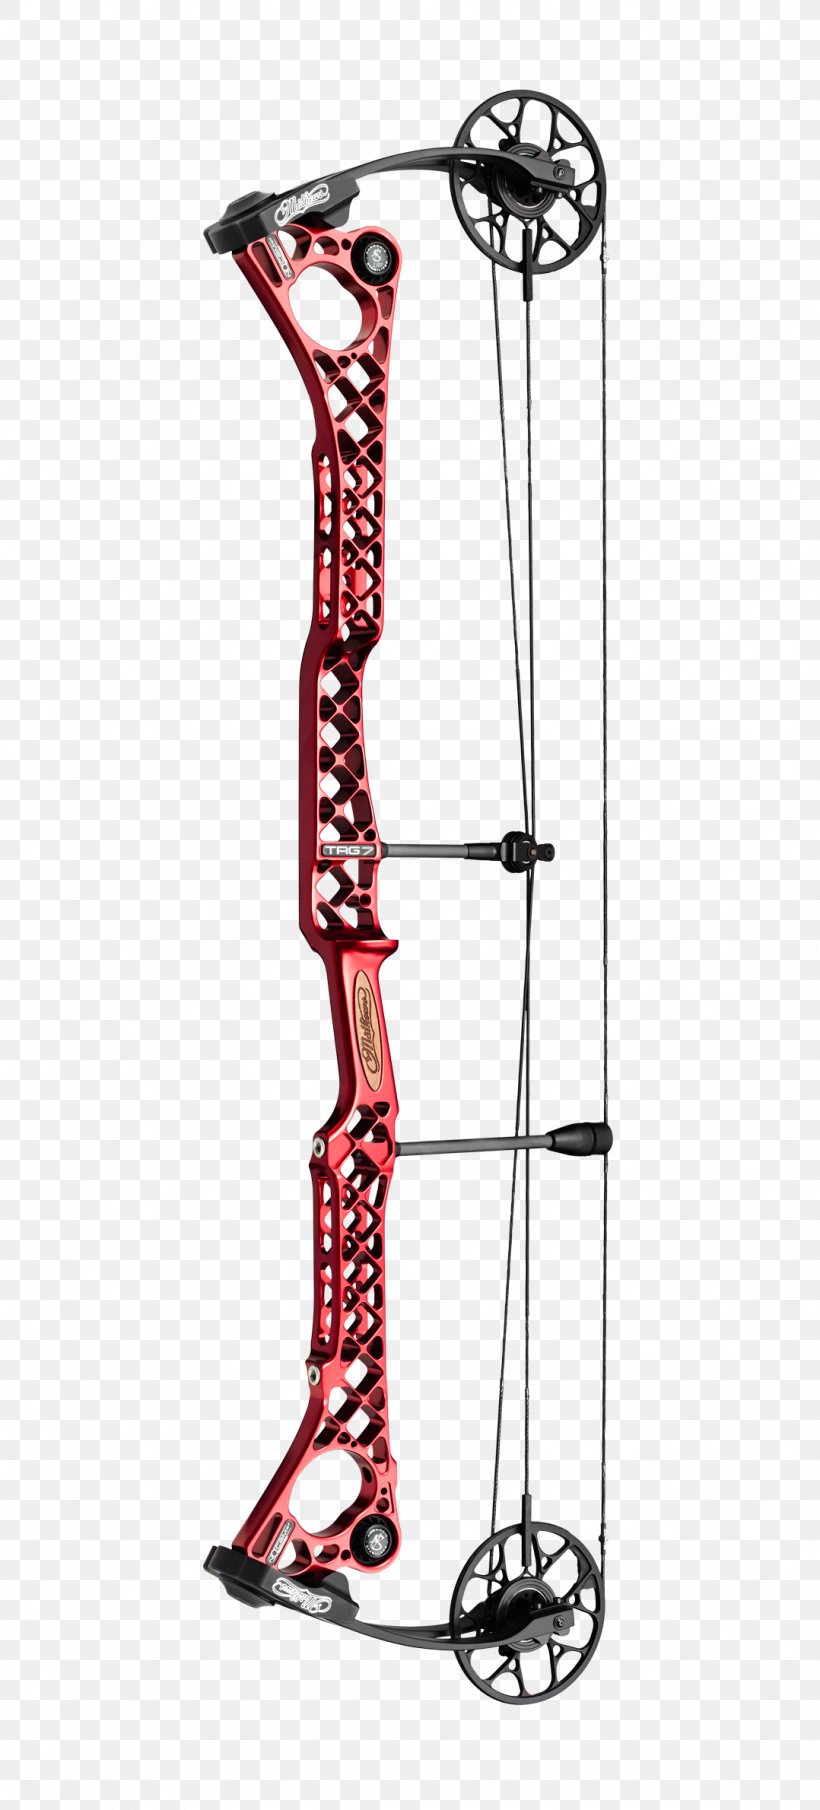 Bow And Arrow Compound Bows Archery Hunting Binary Cam, PNG, 1078x2380px, Bow And Arrow, Advanced Archery, Archery, Binary Cam, Cam Download Free